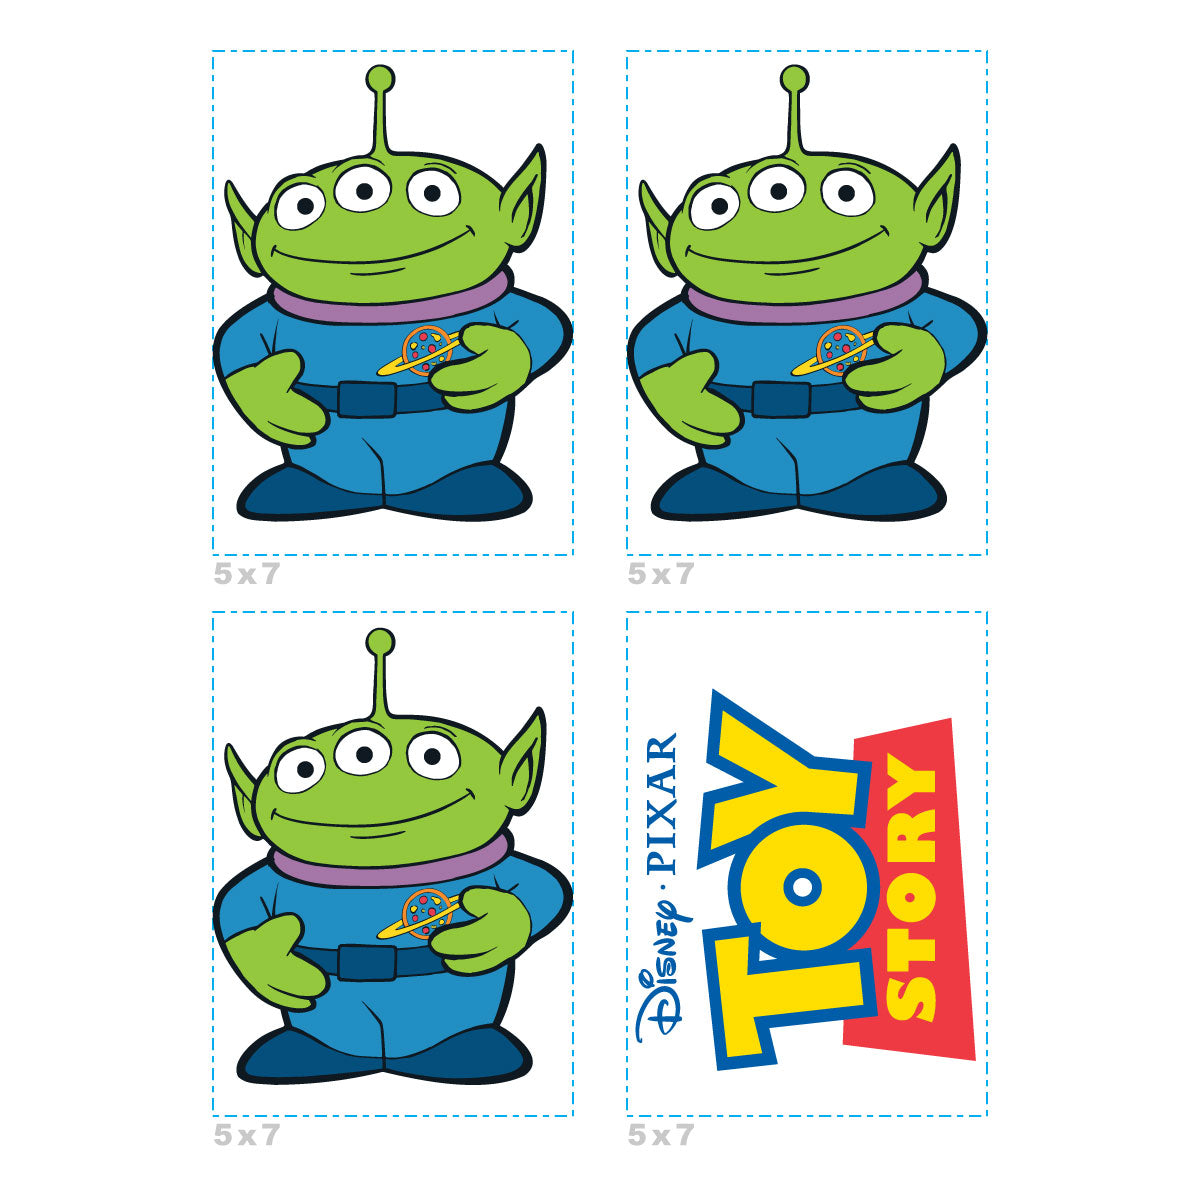 Sheet of 4 -TOY STORY: Aliens Minis        - Officially Licensed Disney Removable Wall   Adhesive Decal